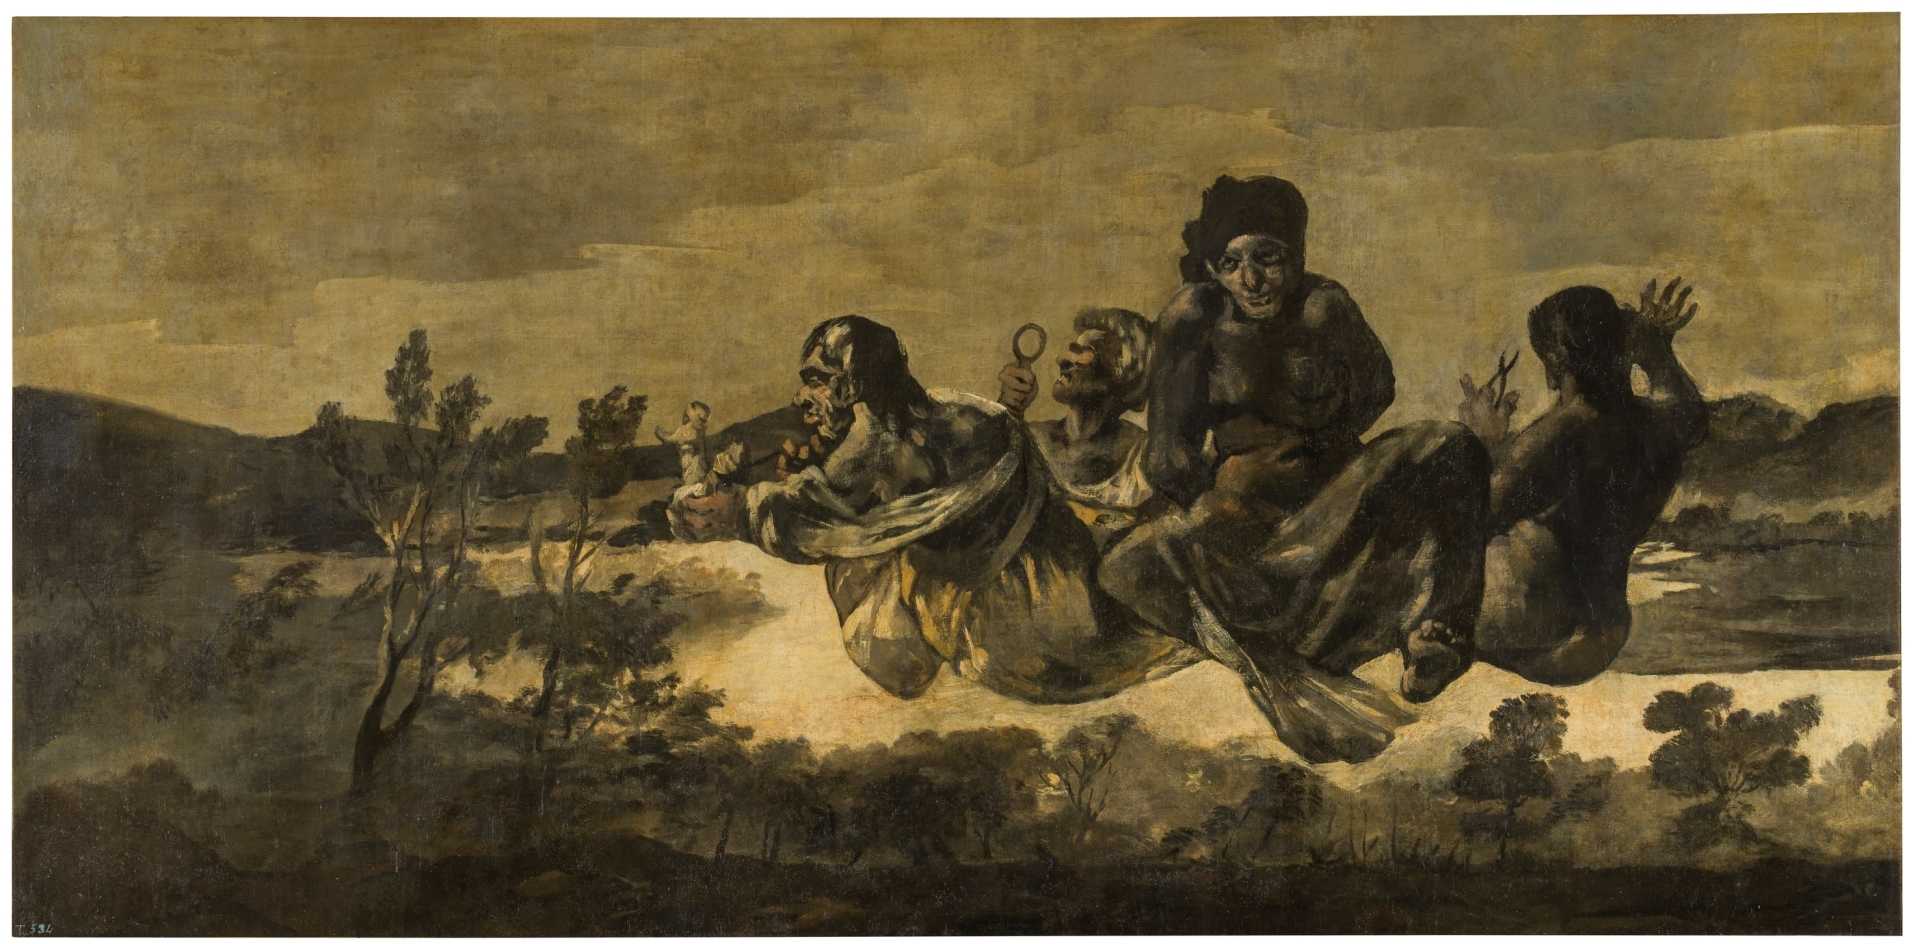 Find out more about Francisco de Goya - Atropos or The Fates